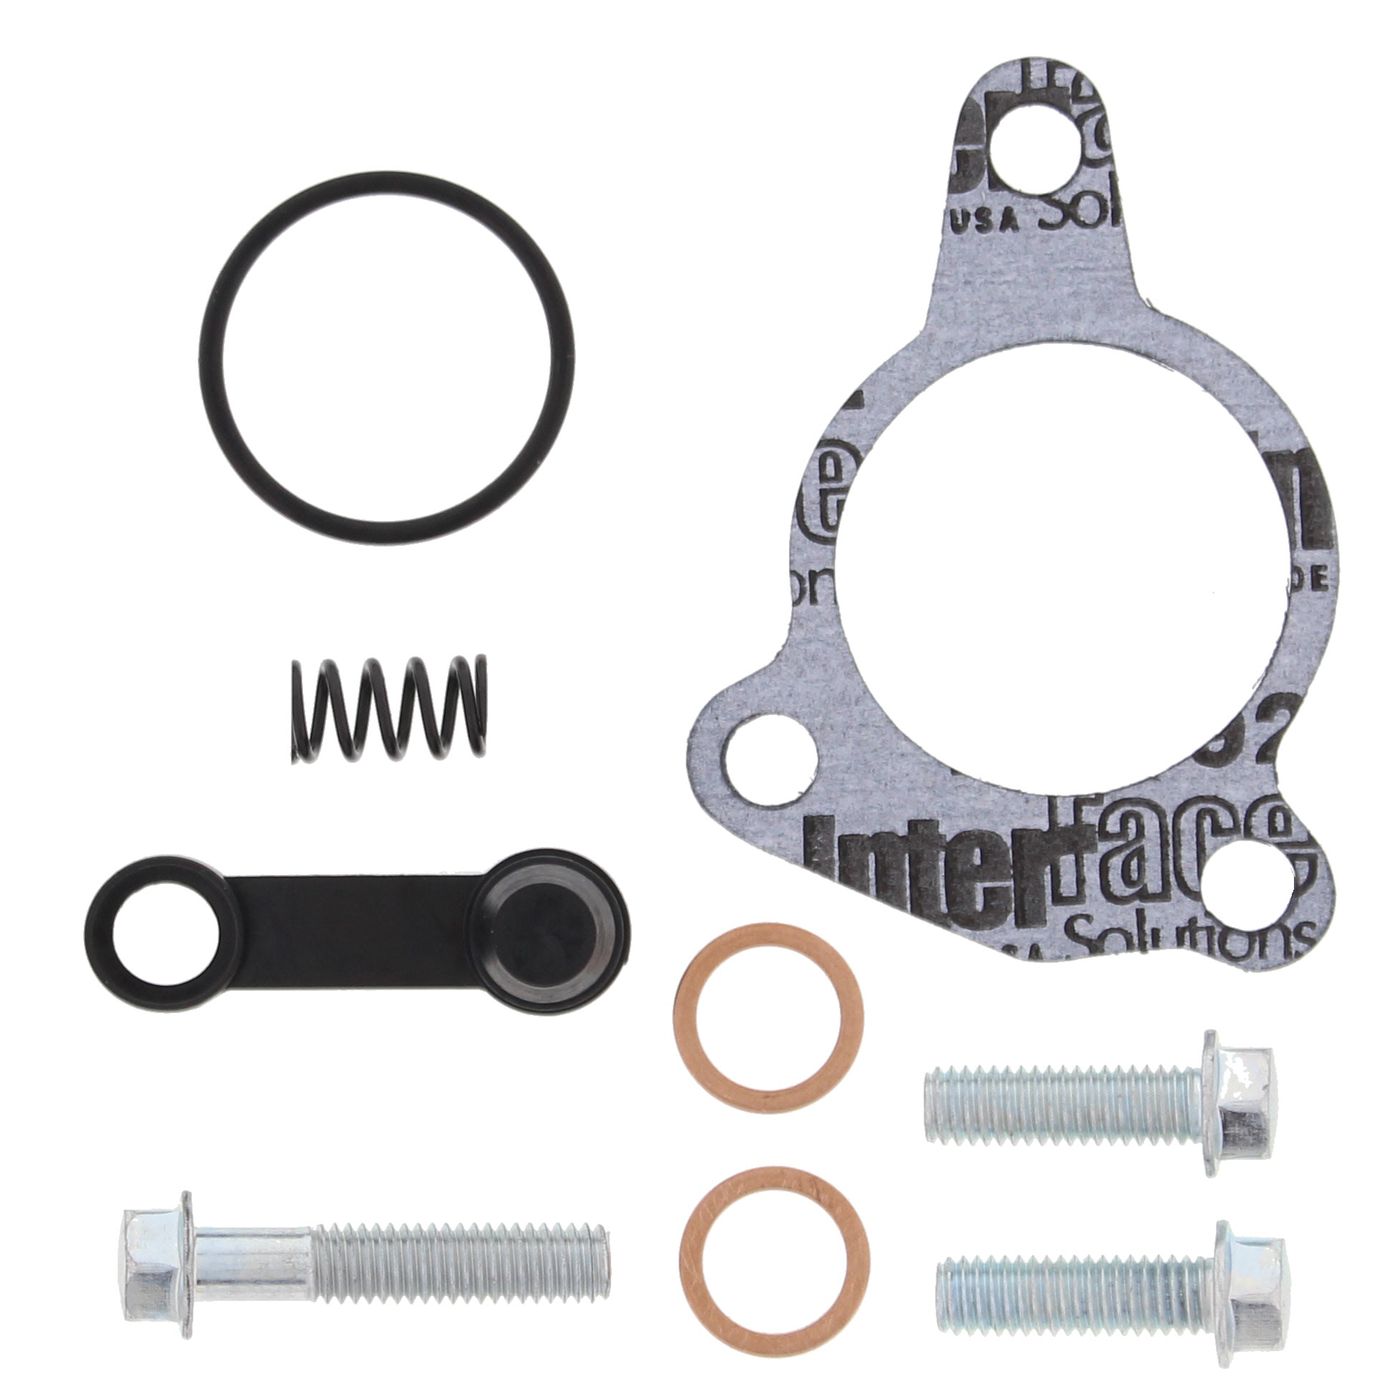 Wrp Clutch Slave Cylinder Kits - WRP186003 image